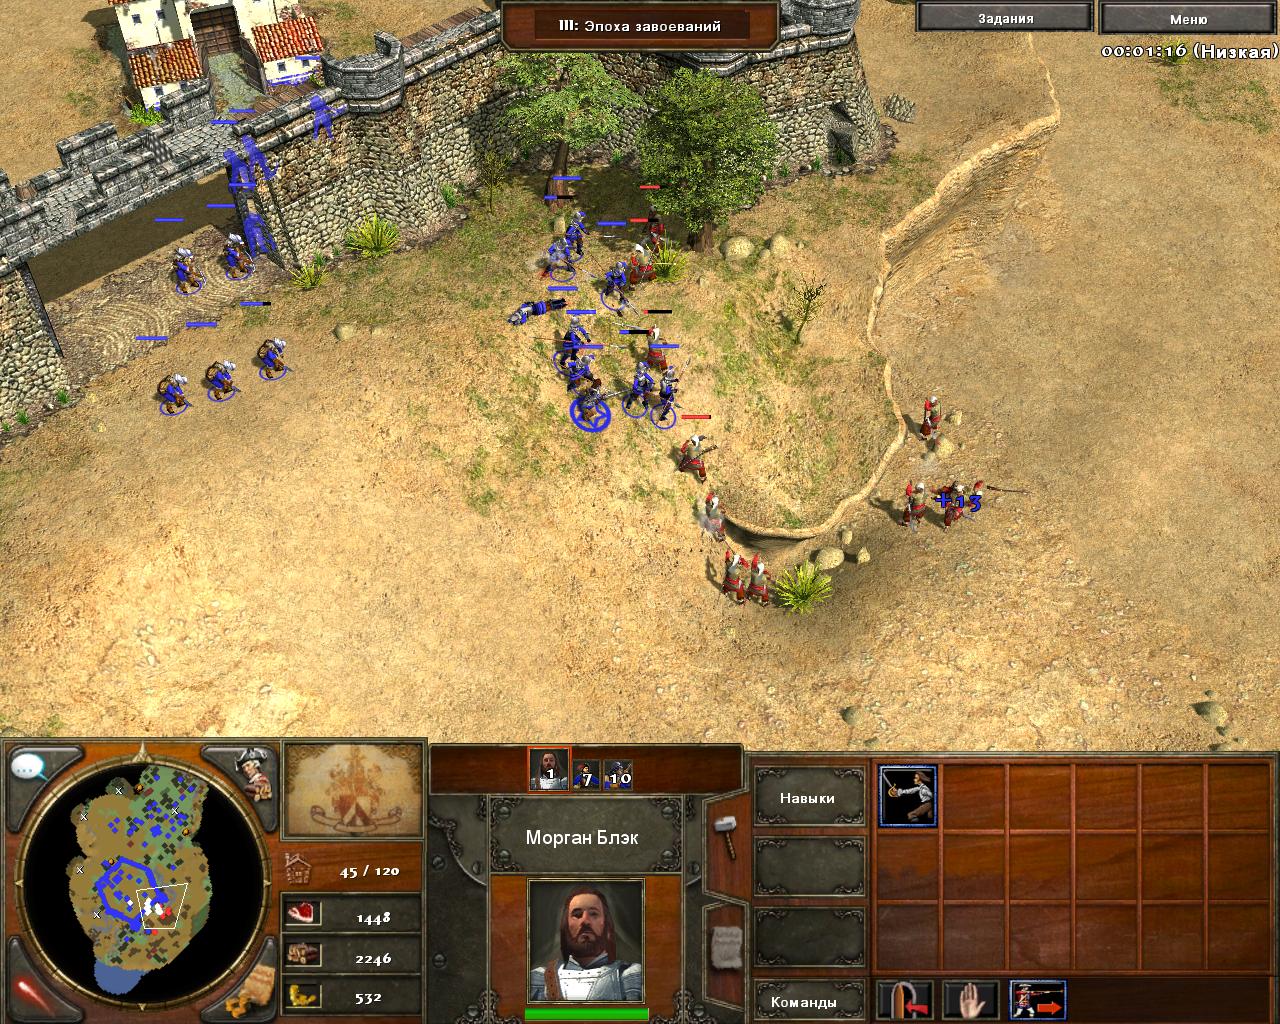 age of empires 3 torrent